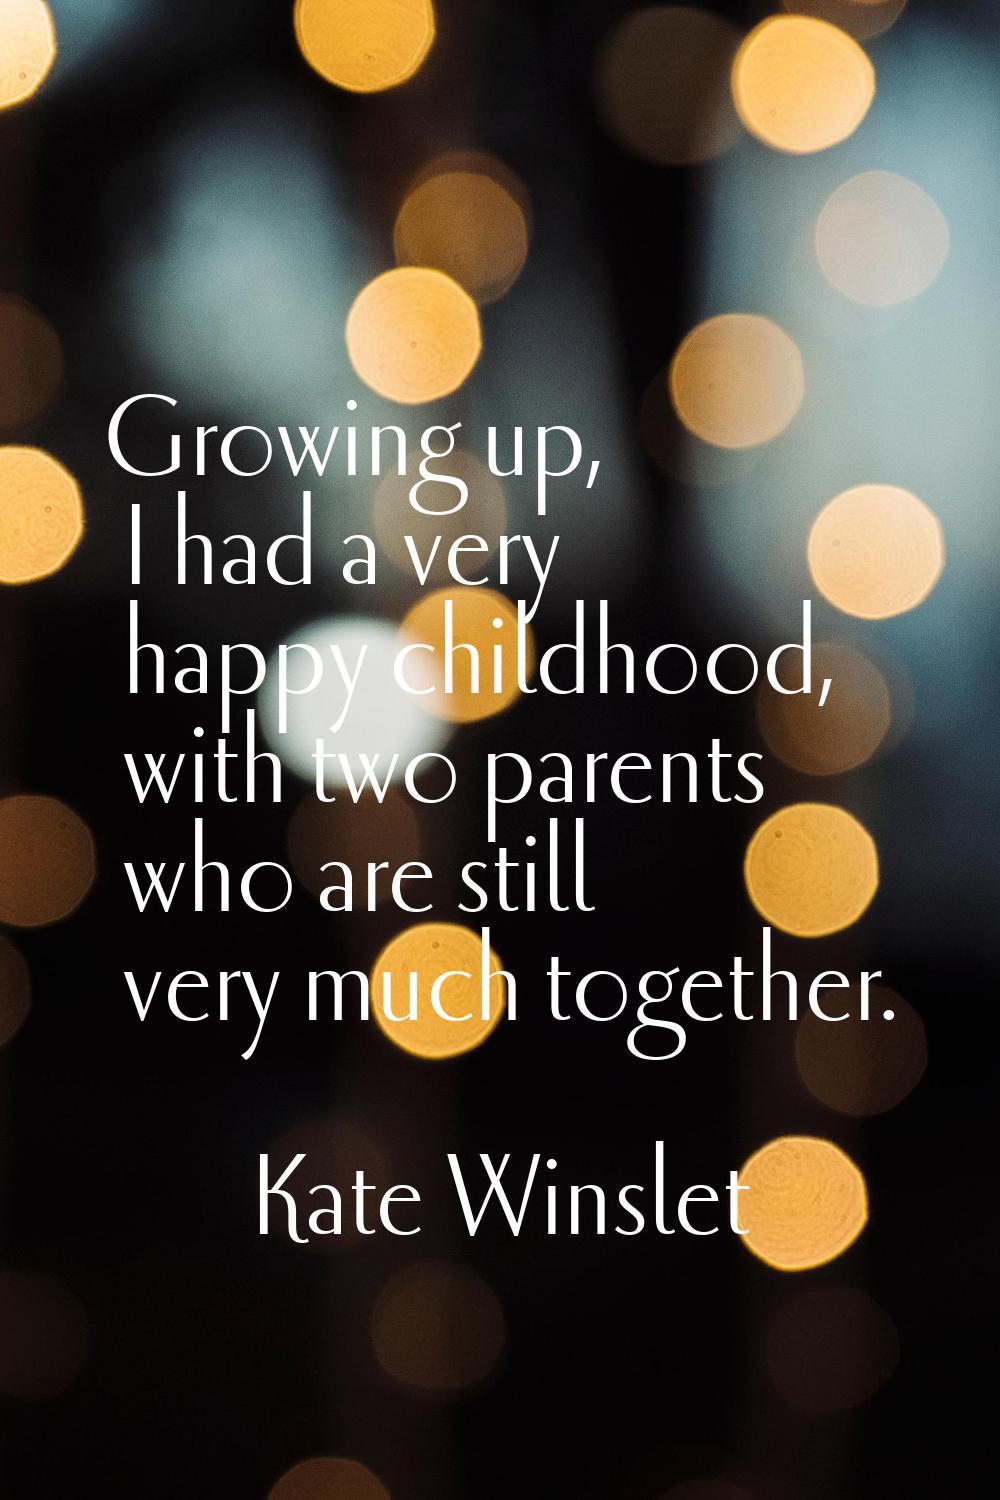 Growing up, I had a very happy childhood, with two parents who are still very much together.